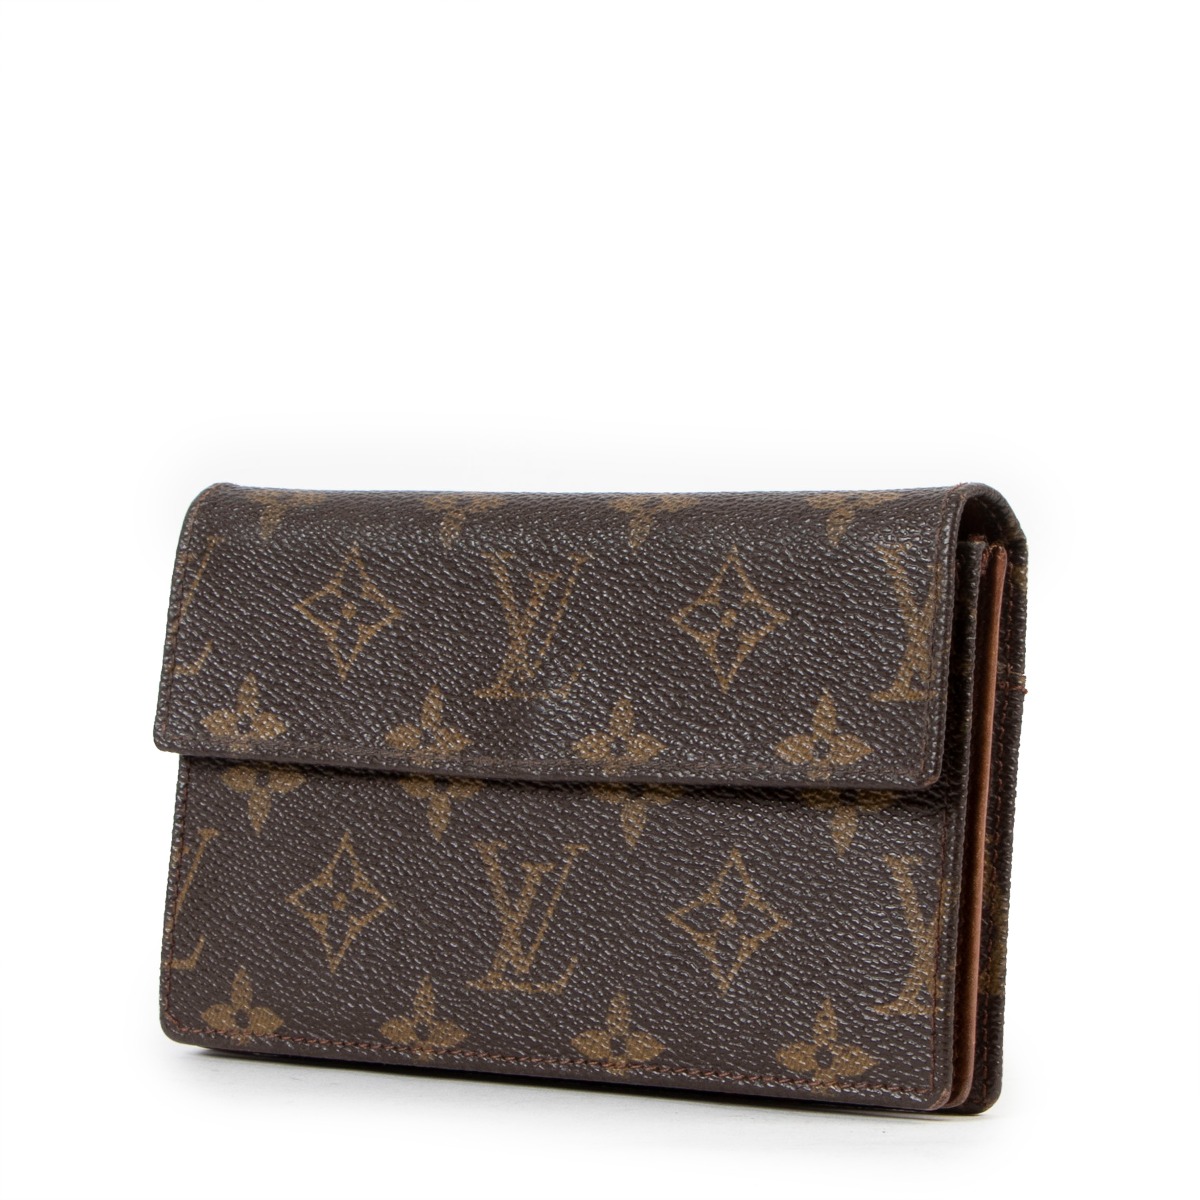 Louis Vuitton Monogram Canvas Vintage Malletier French Purse Wallet at  Jill's Consignment